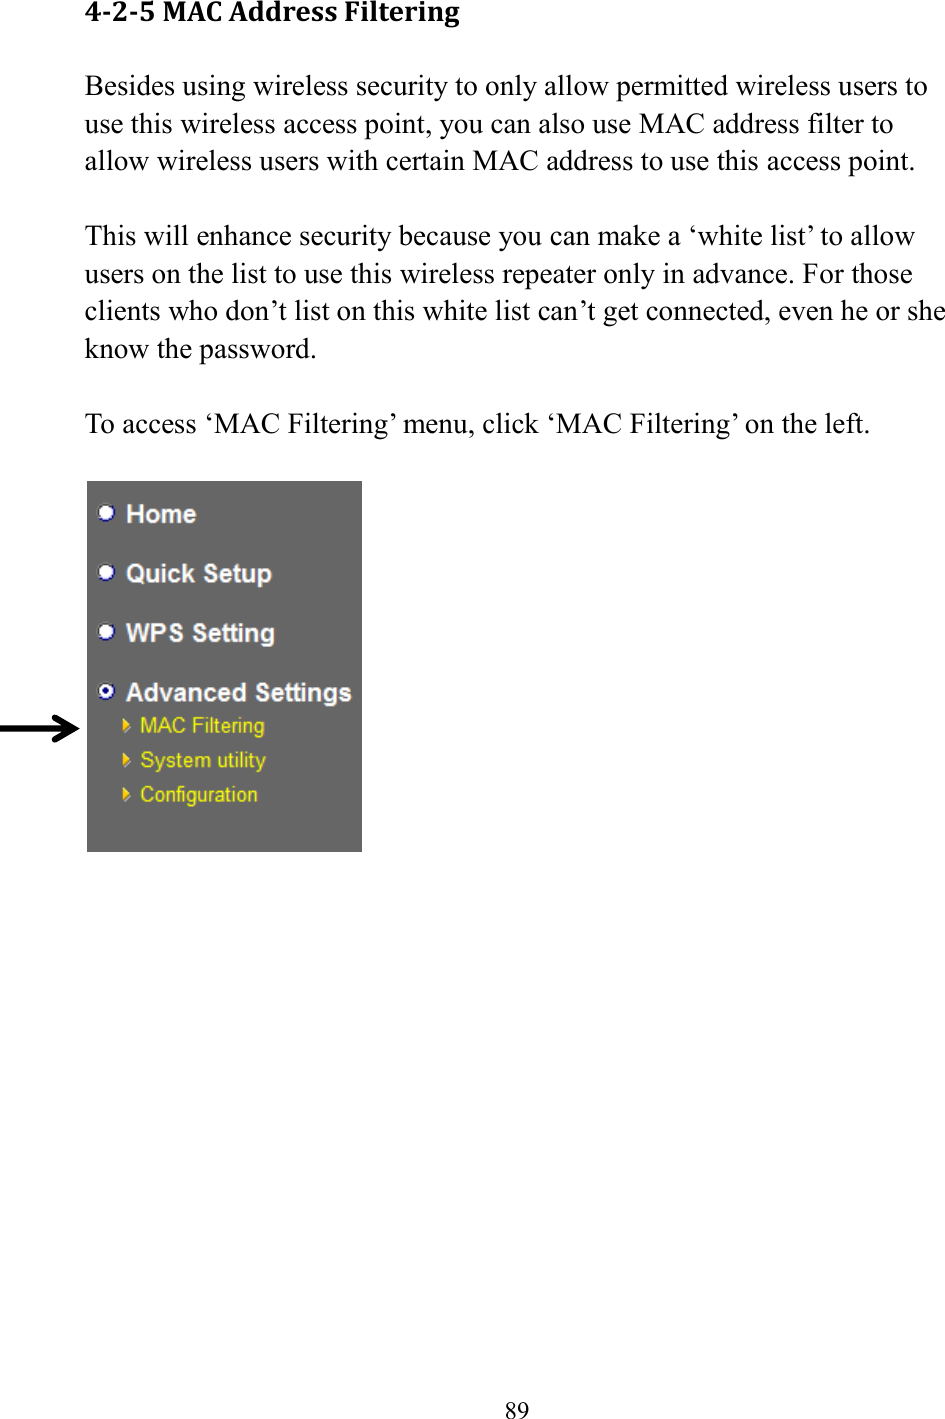  89  4-2-5 MAC Address Filtering Besides using wireless security to only allow permitted wireless users to use this wireless access point, you can also use MAC address filter to allow wireless users with certain MAC address to use this access point.  This will enhance security because you can make a ‘white list’ to allow users on the list to use this wireless repeater only in advance. For those clients who don’t list on this white list can’t get connected, even he or she know the password.  To access ‘MAC Filtering’ menu, click ‘MAC Filtering’ on the left.       